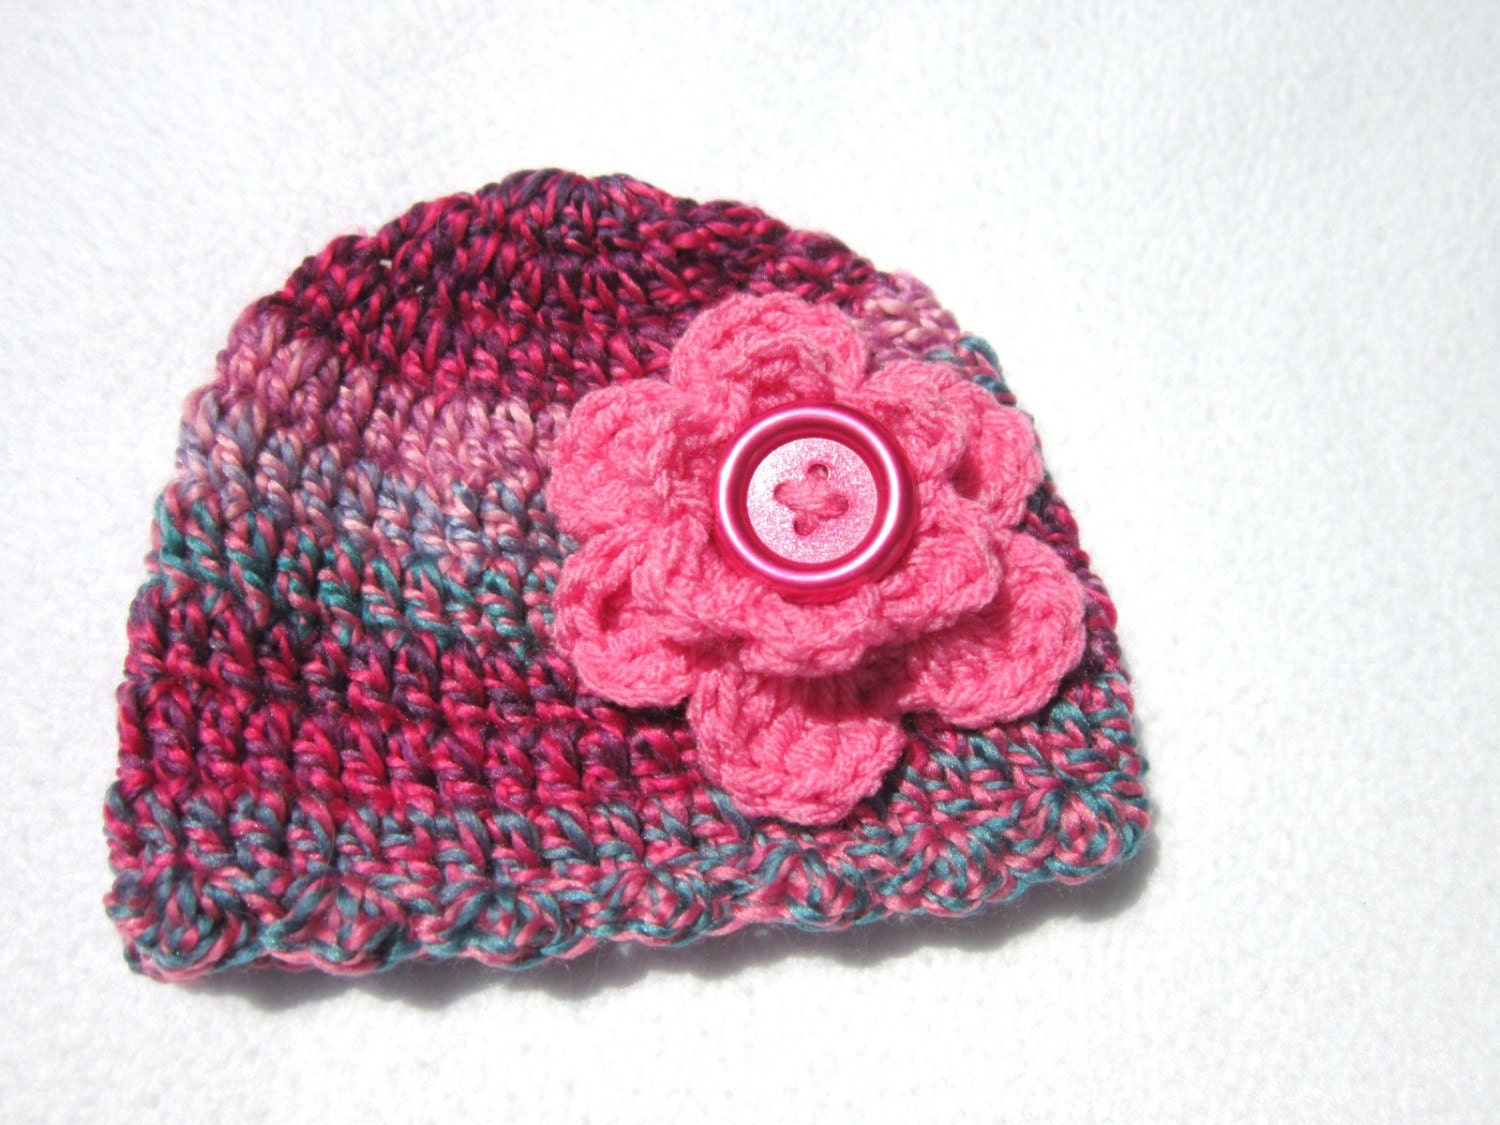 Pink and Turquoise Hat with Pink Flower and by crochetedbycharlene